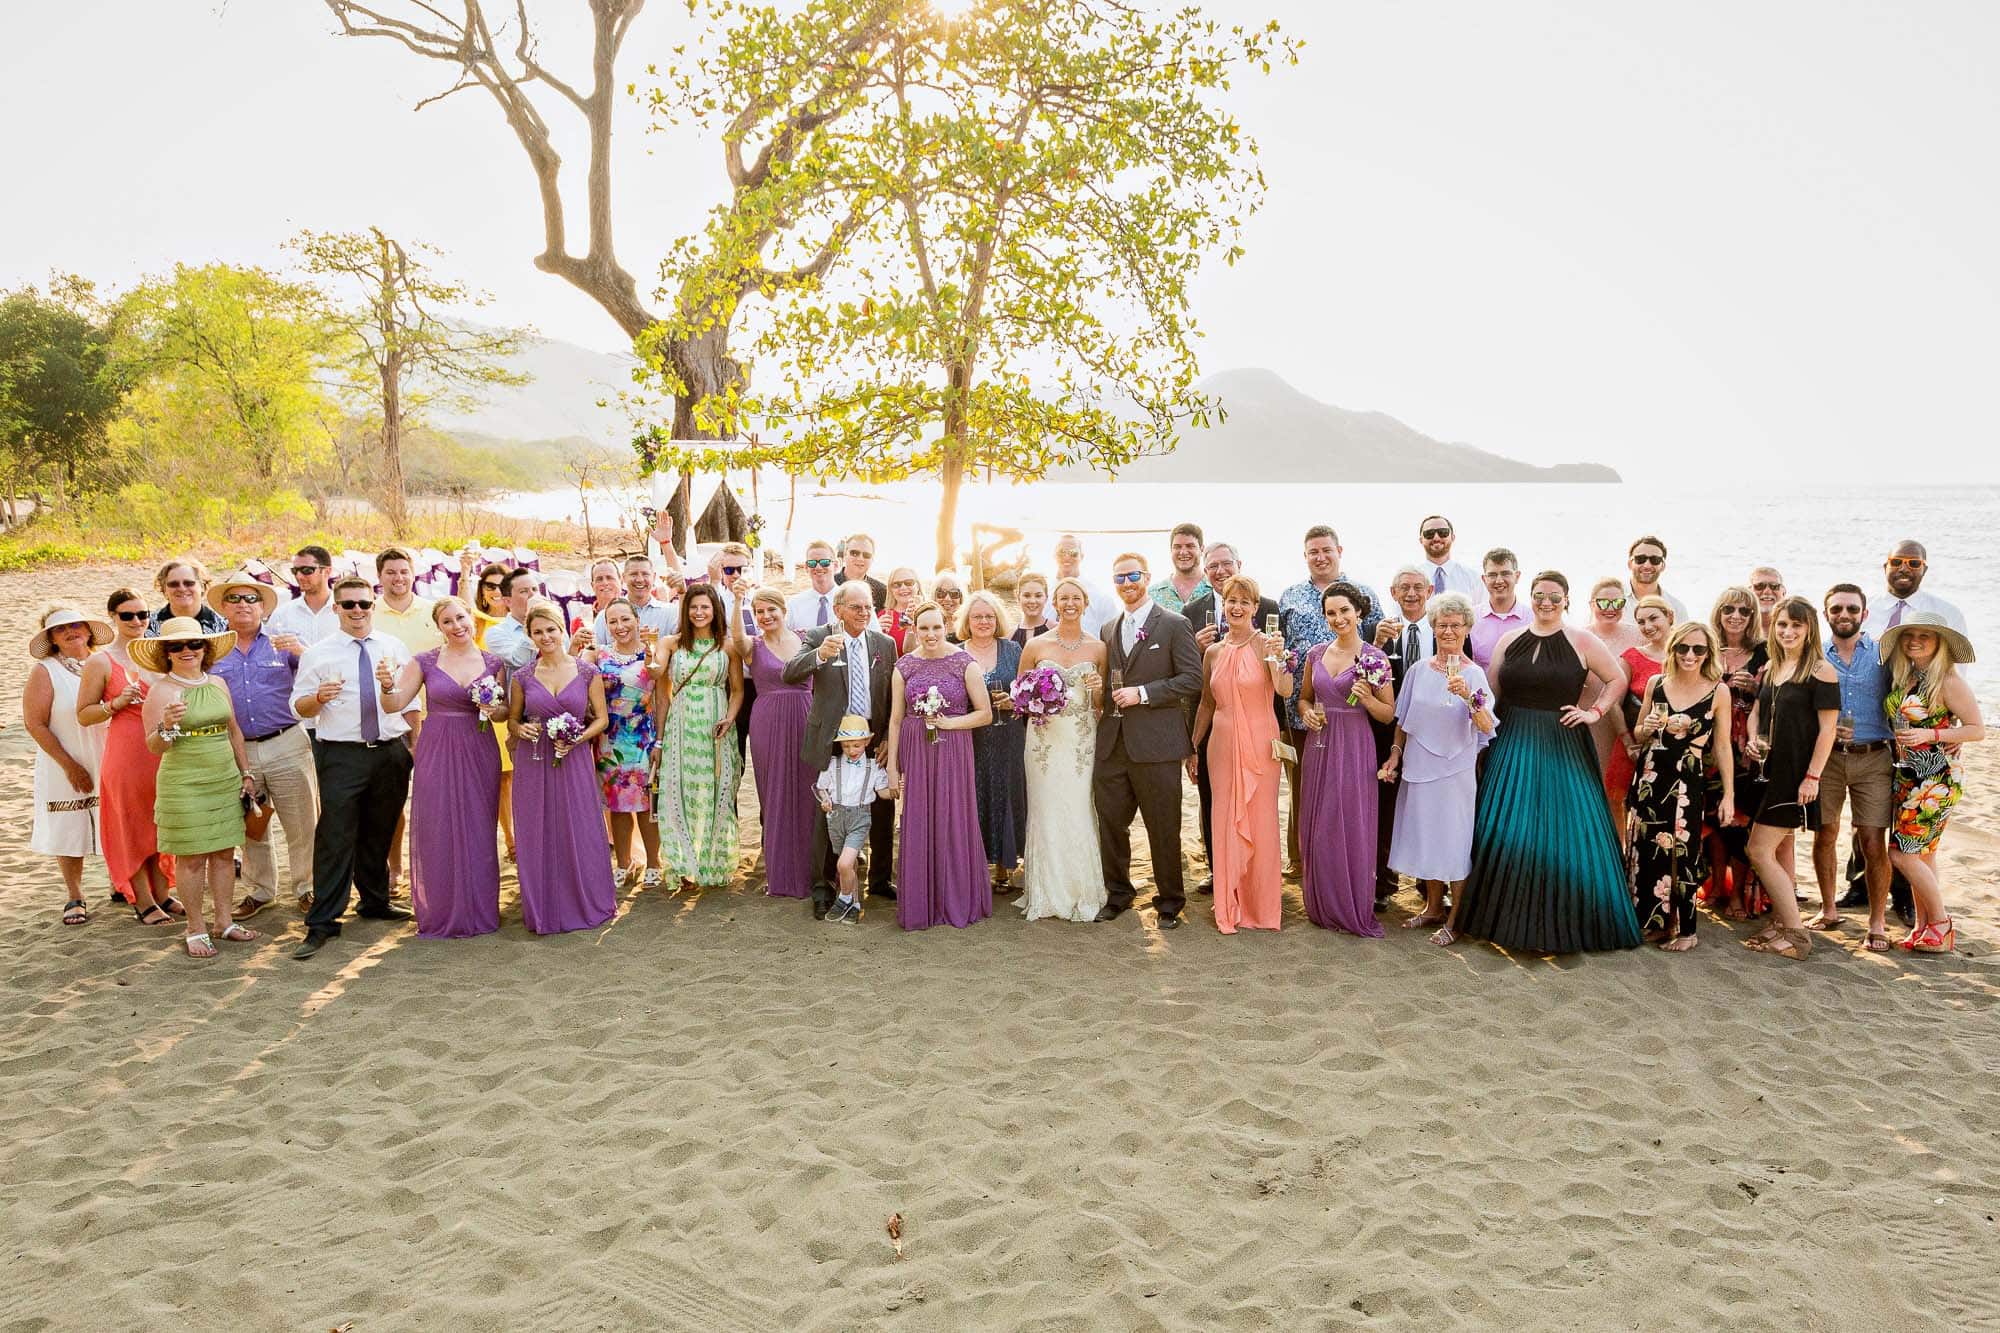 group photo on beach after wedding in costa rica